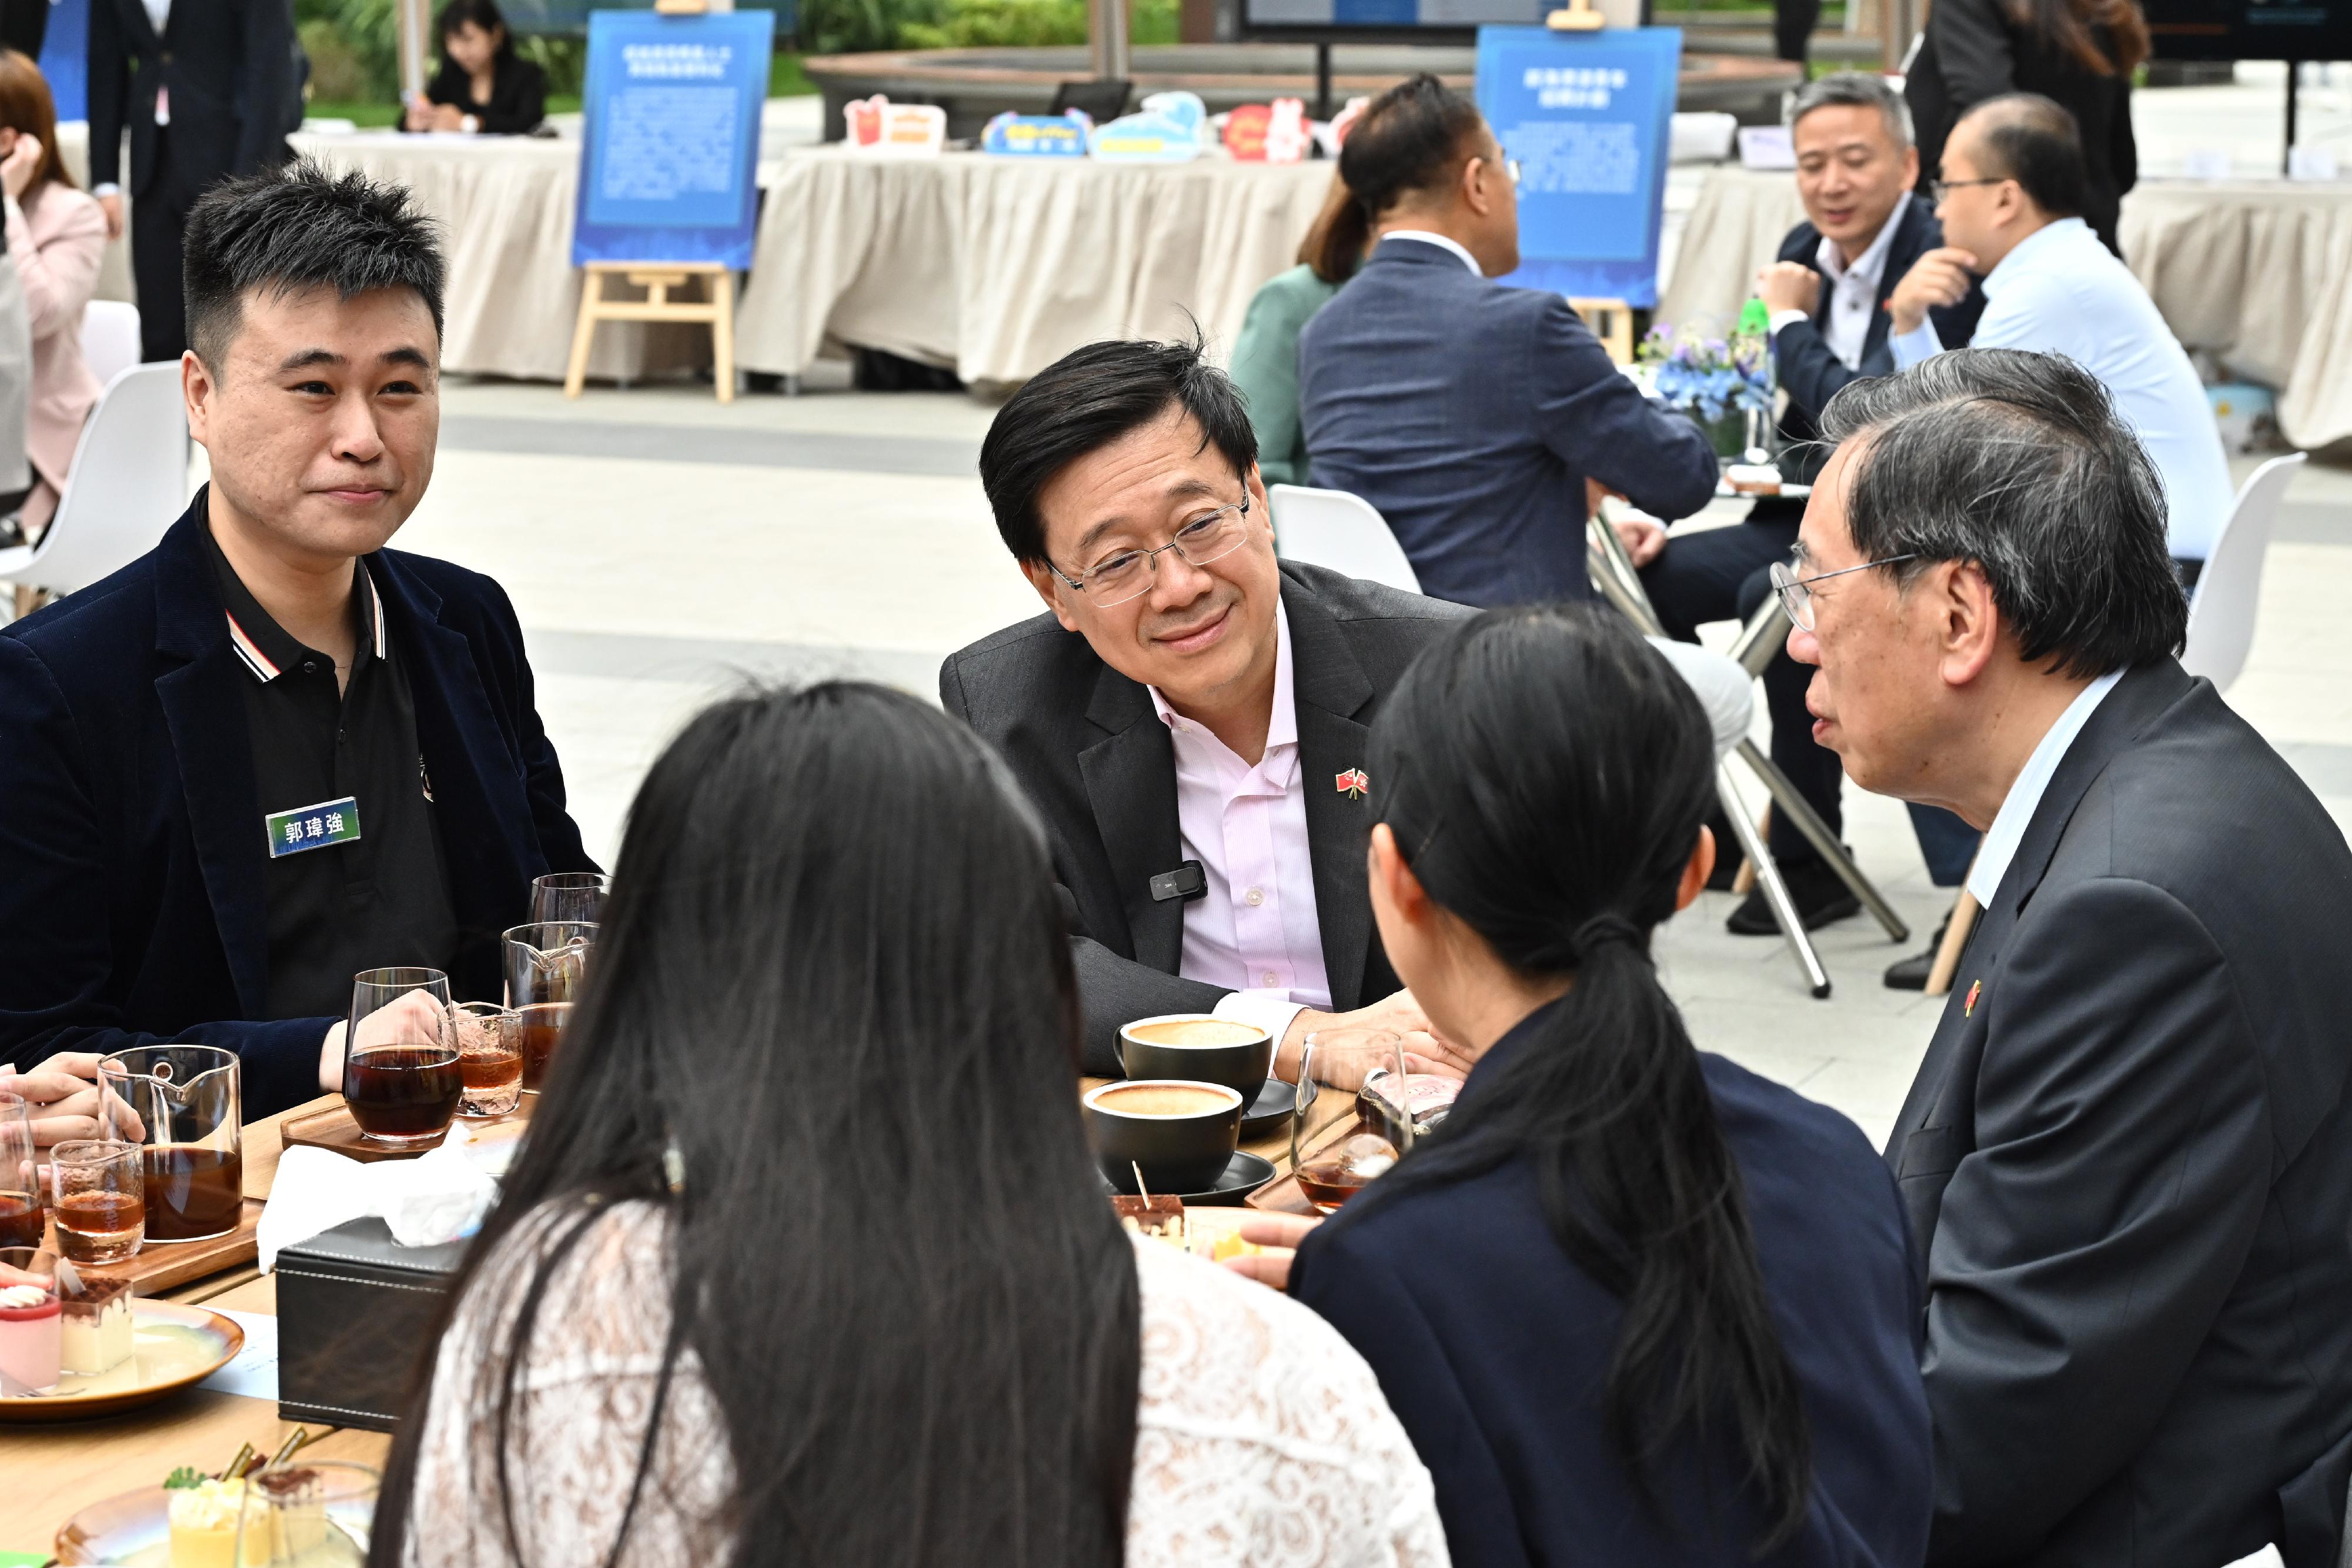 The Chief Executive, Mr John Lee, led a delegation of the Hong Kong Special Administrative Region Government and the Legislative Council (LegCo) to visit Shenzhen today (April 22). Photo shows Mr Lee (second left) exchanging views with the Hong Kong youth entrepreneur at the Qiahai Shenzhen-Hong Kong Youth Innovation and Entrepreneur Hub.